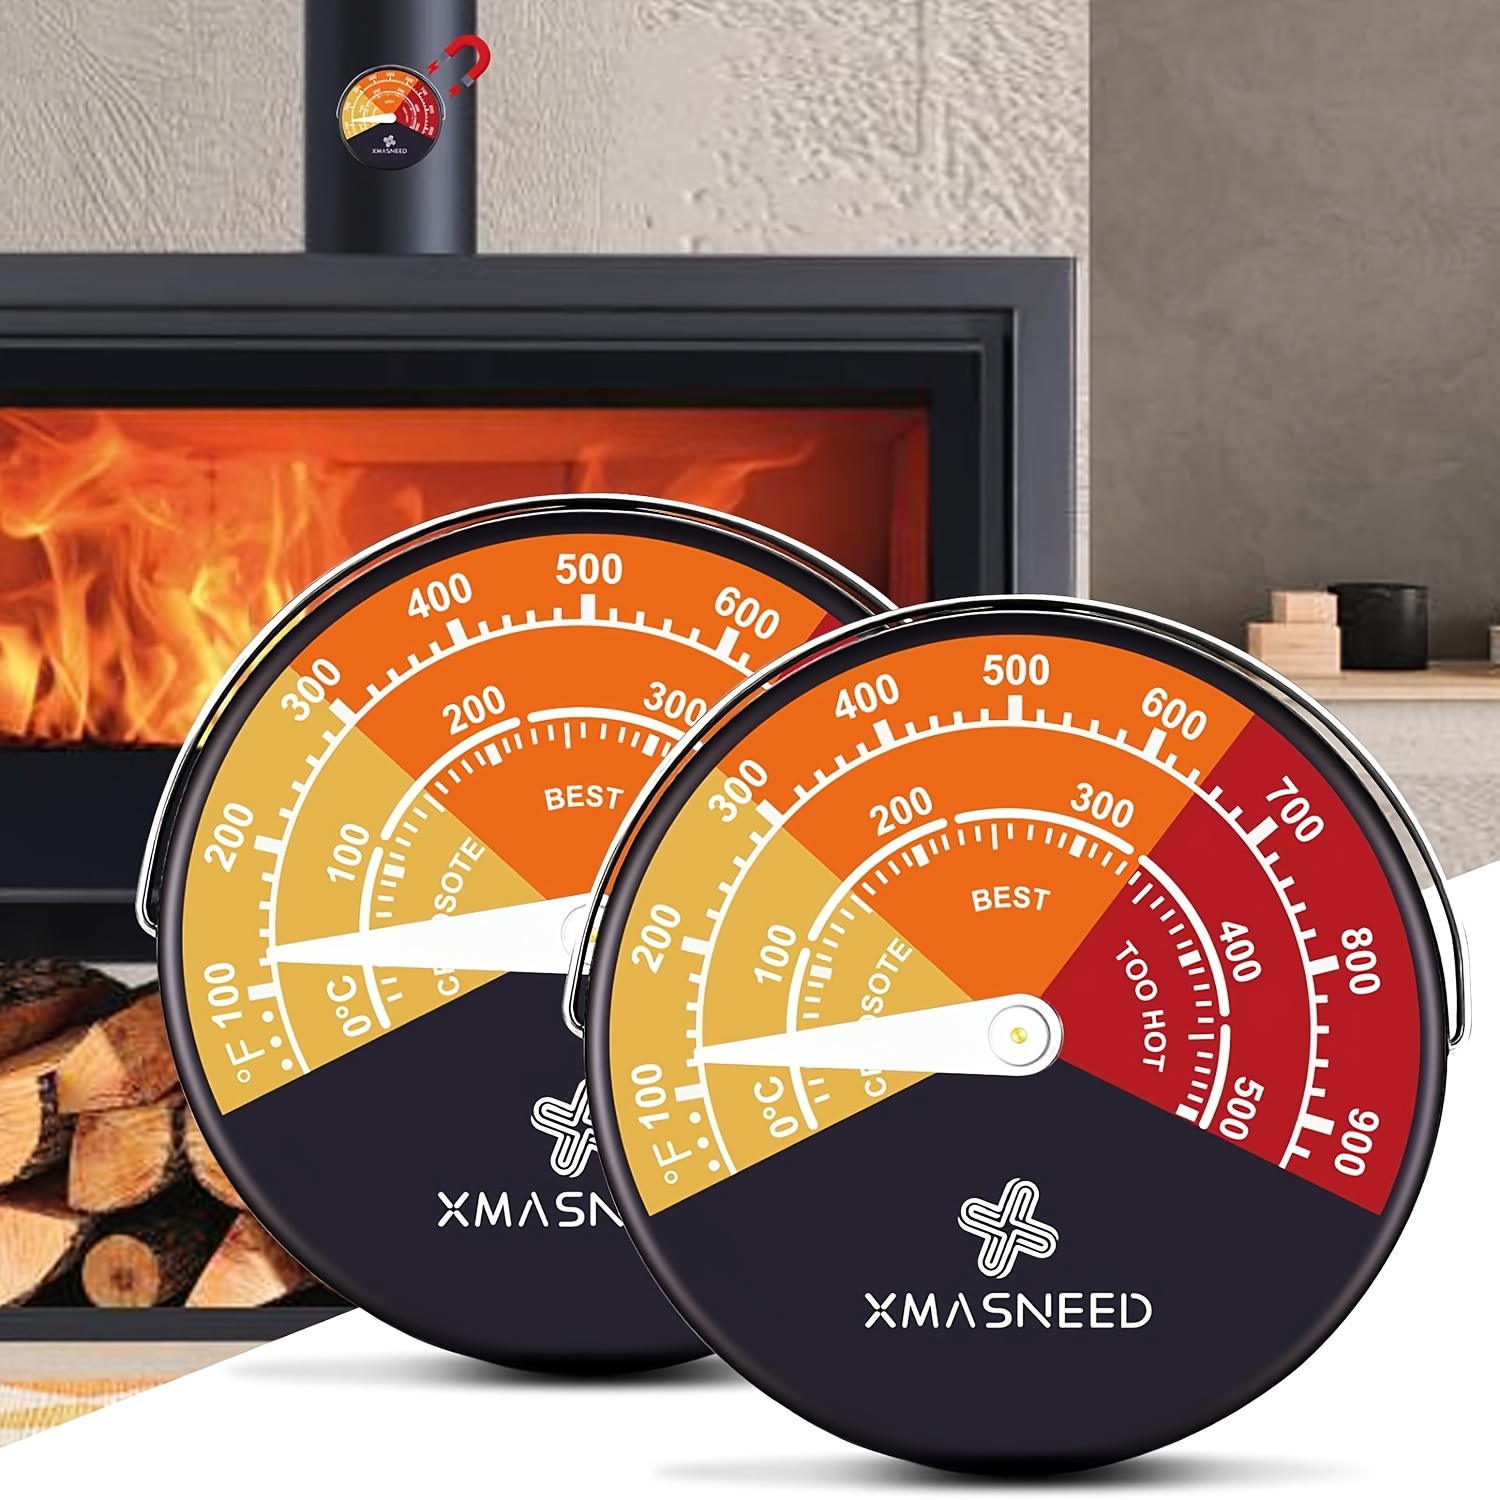 Hanaoyo Wood Stove Thermometer Magnetic Stove Pipe Thermometer with Large Dial, Wood Burning Stove Thermometer Stove Top Meter for Stove Top, GAS